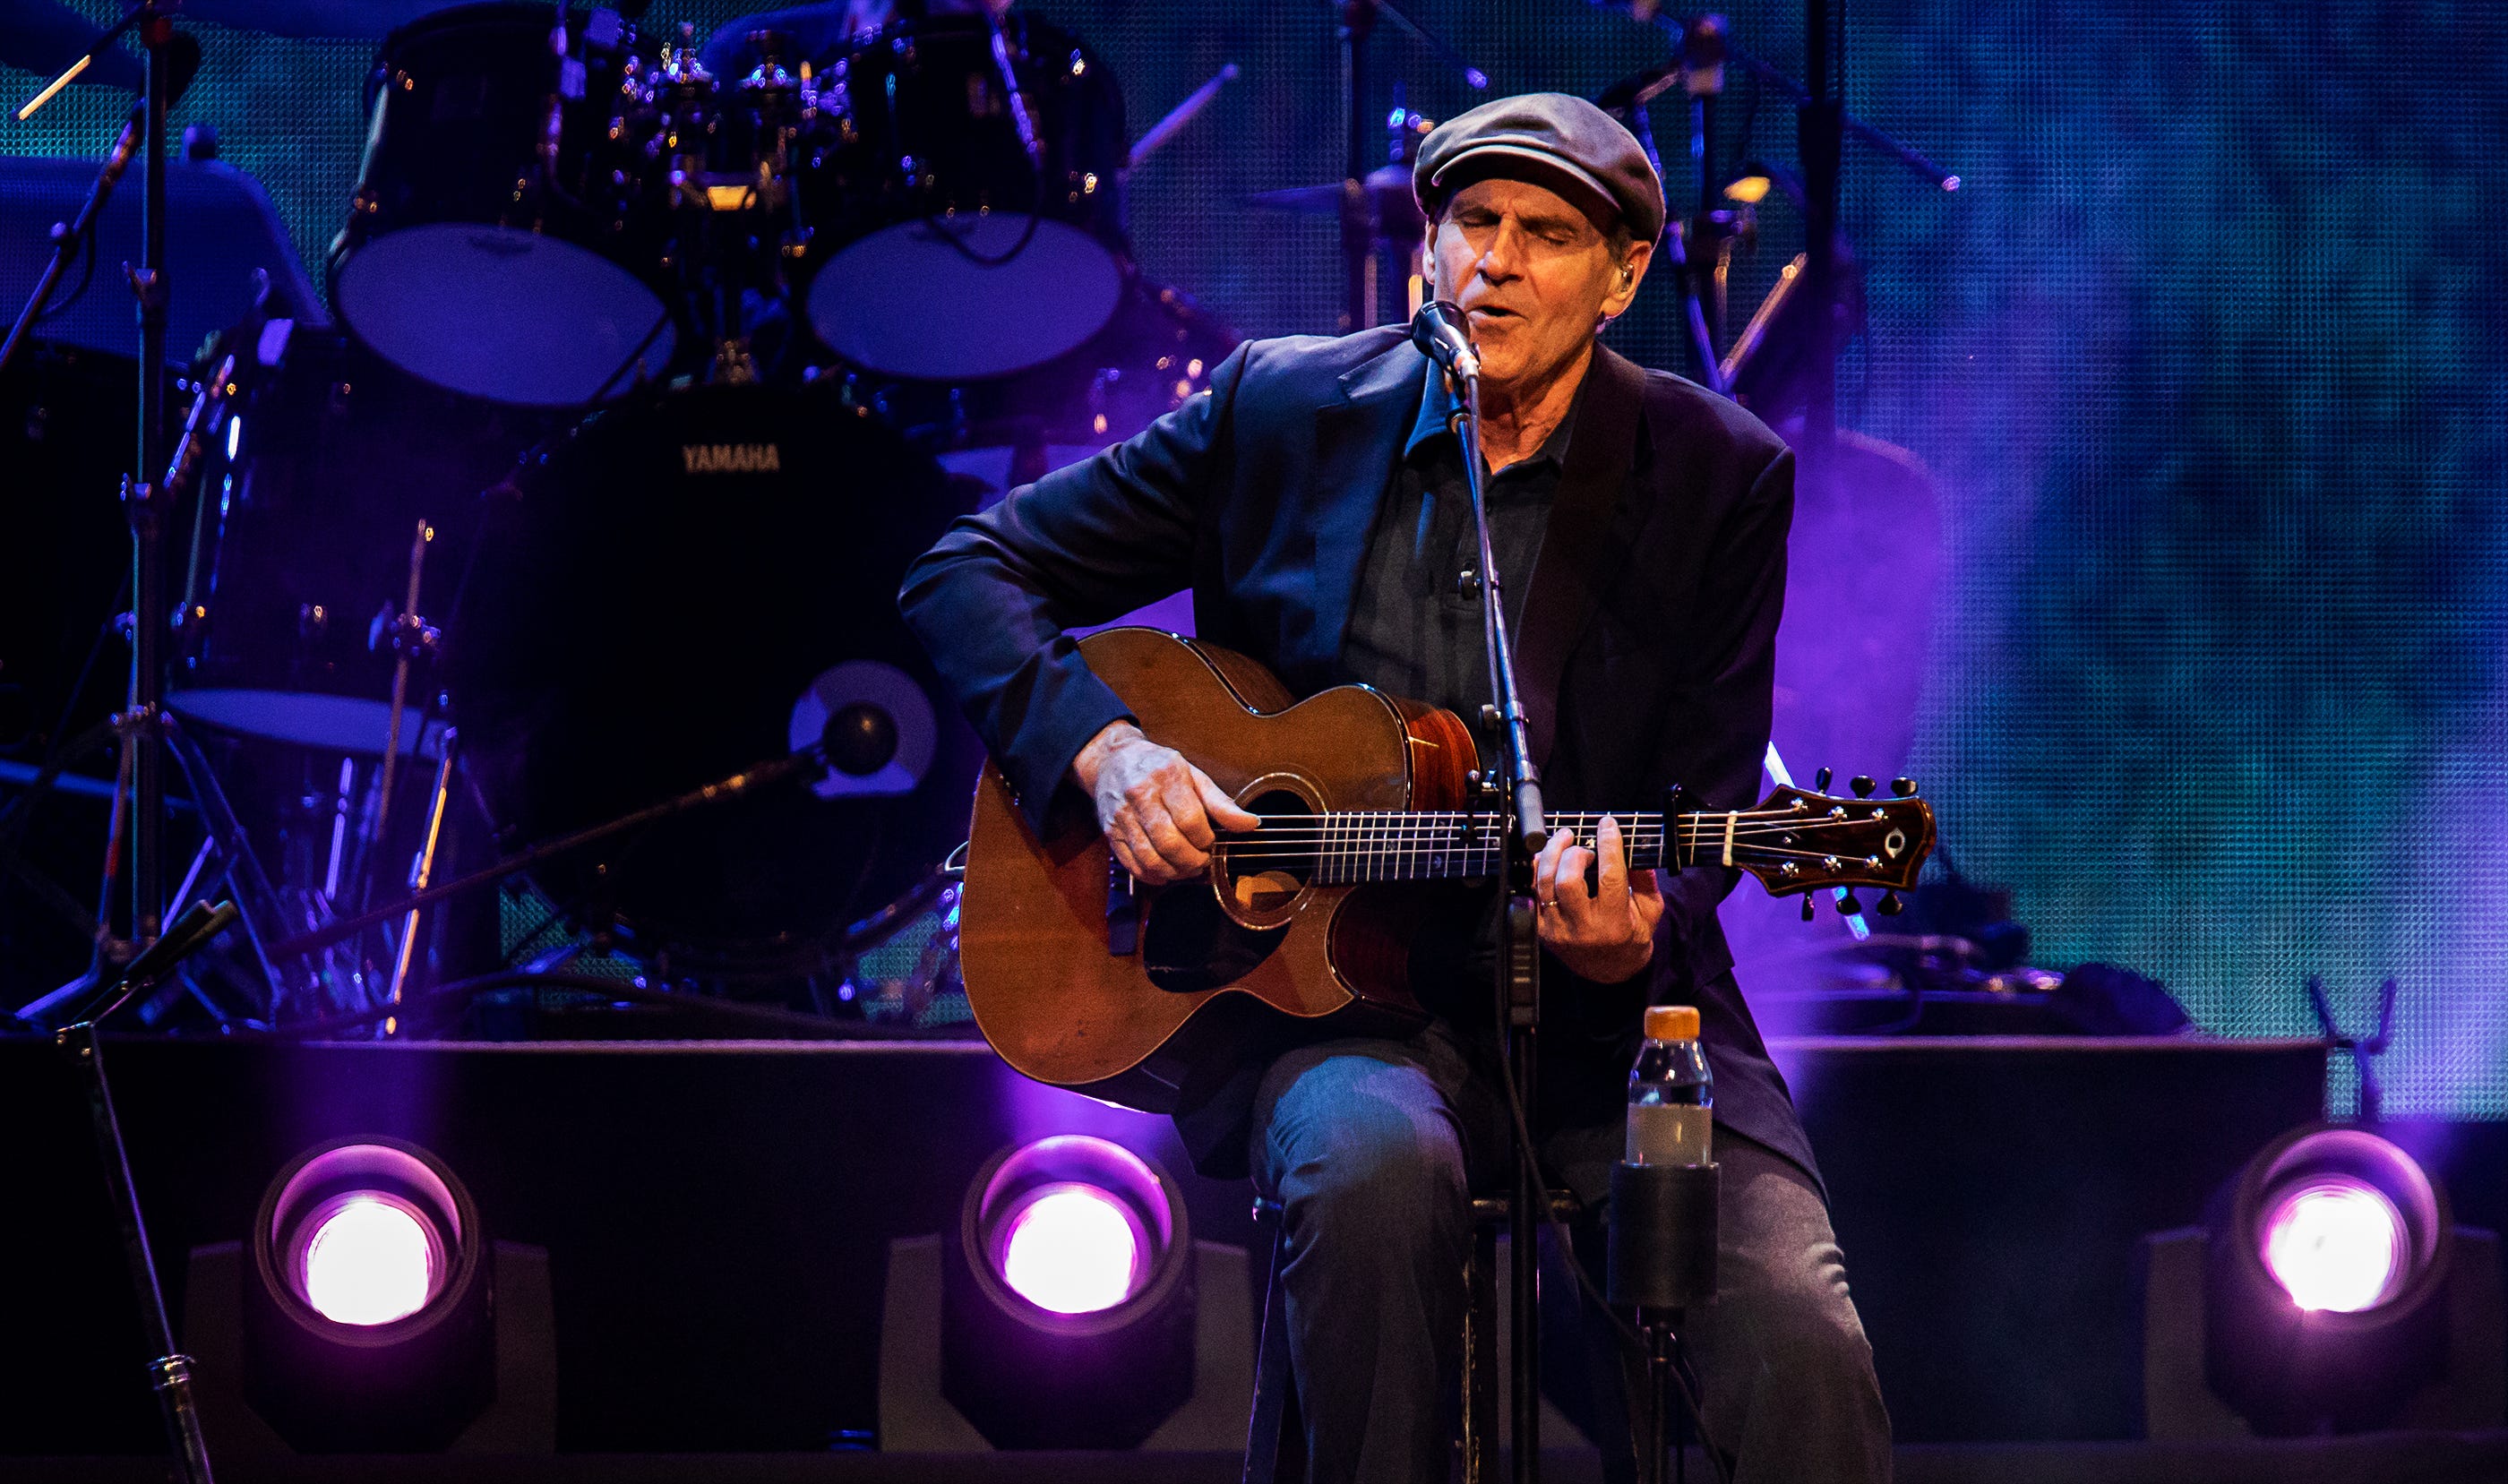 How to get tickets for James Taylor, Jackson Browne in Florida